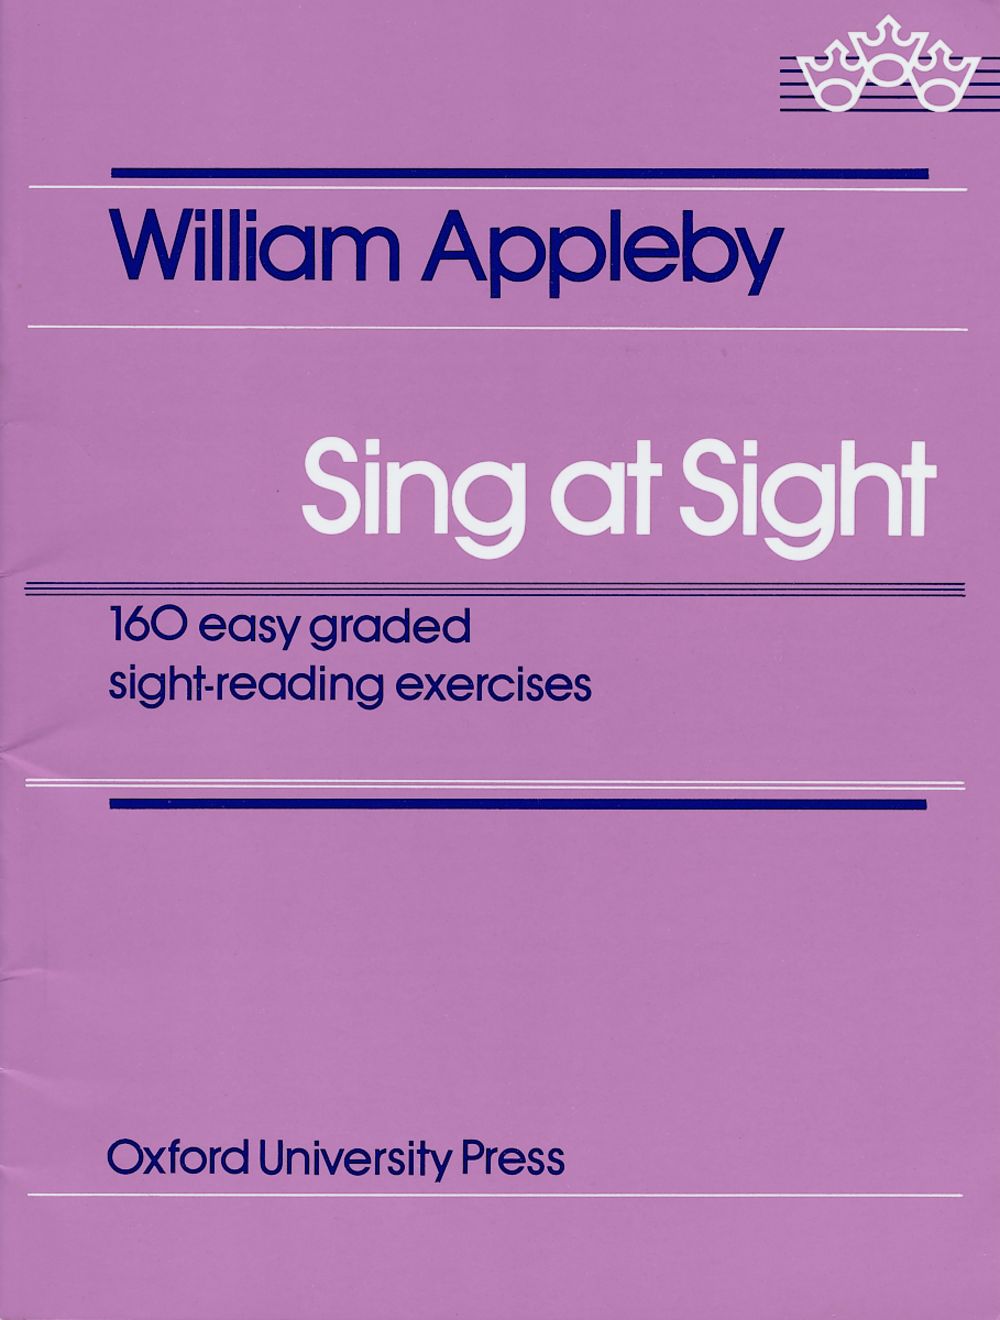 Sing At Sight Appleby Sheet Music Songbook